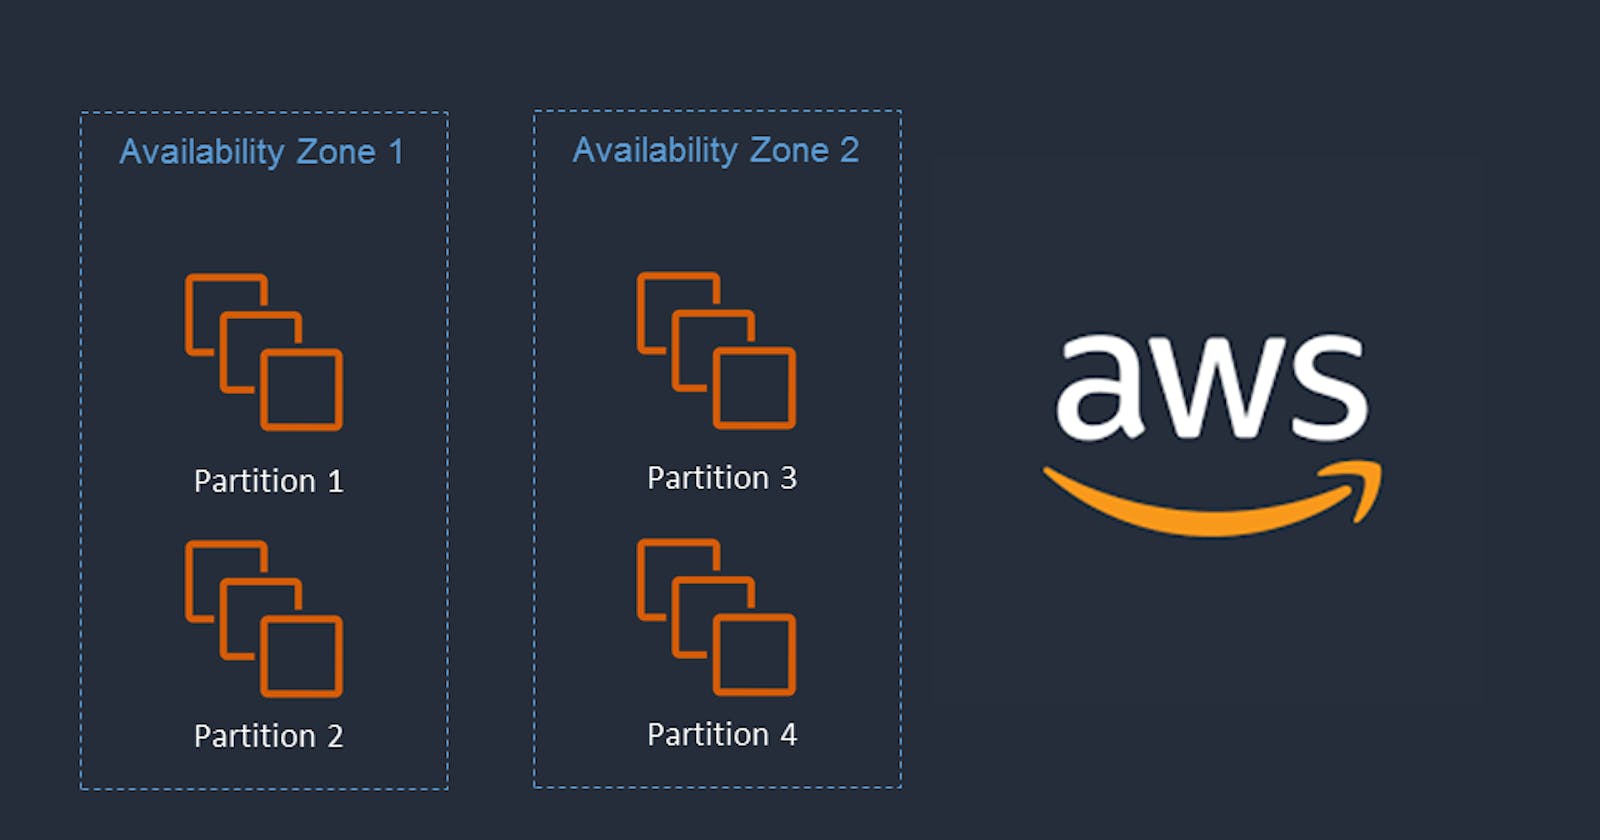 What are The AWS EC2 Instance Placement Groups?